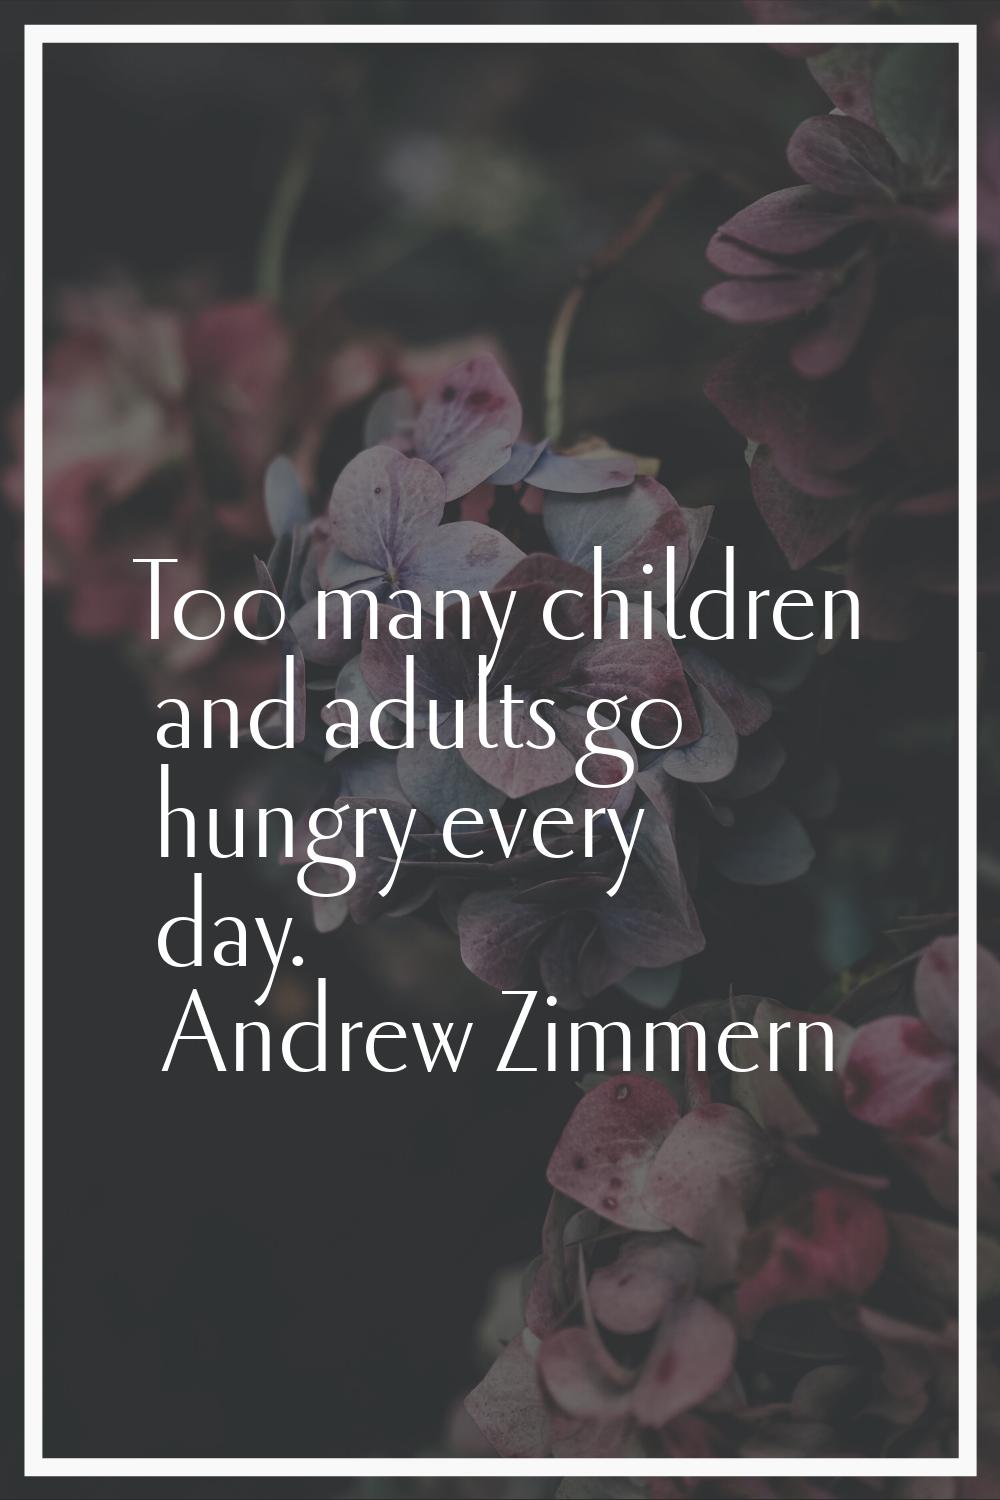 Too many children and adults go hungry every day.